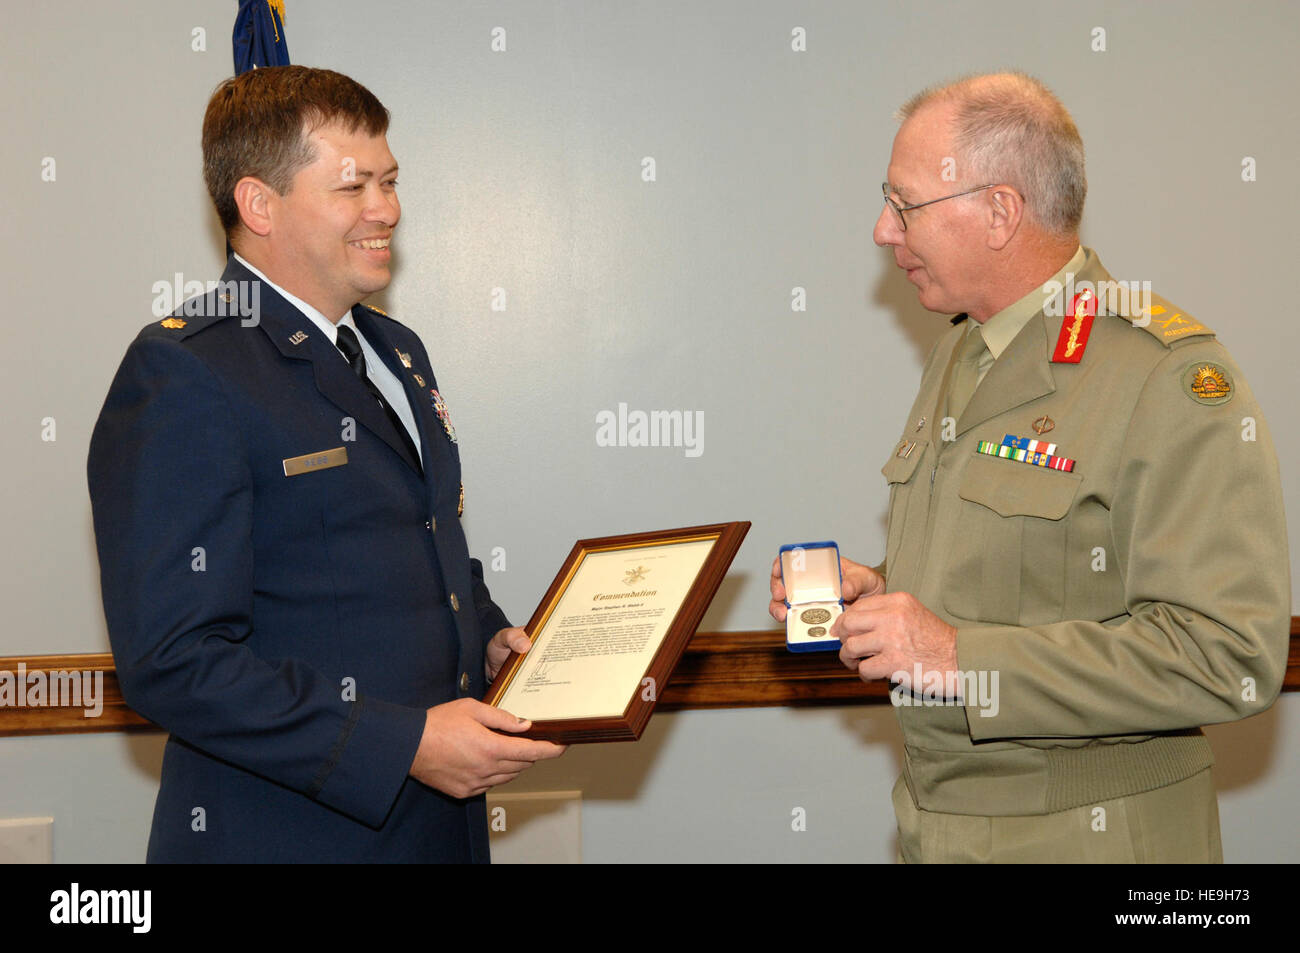 Australian Army Lt. Gen. David Hurley presents the Capability Development Group Commendation Award to Maj. Steven Webb on behalf of the Australian Department of Defense Dec. 11 at the Pentagon. Major Webb, an international affairs officer, received the award for his successful efforts in helpign bring the C-17 Globemaster III to the Australian fleet. Tech. Sgt. Cohen Young) Stock Photo